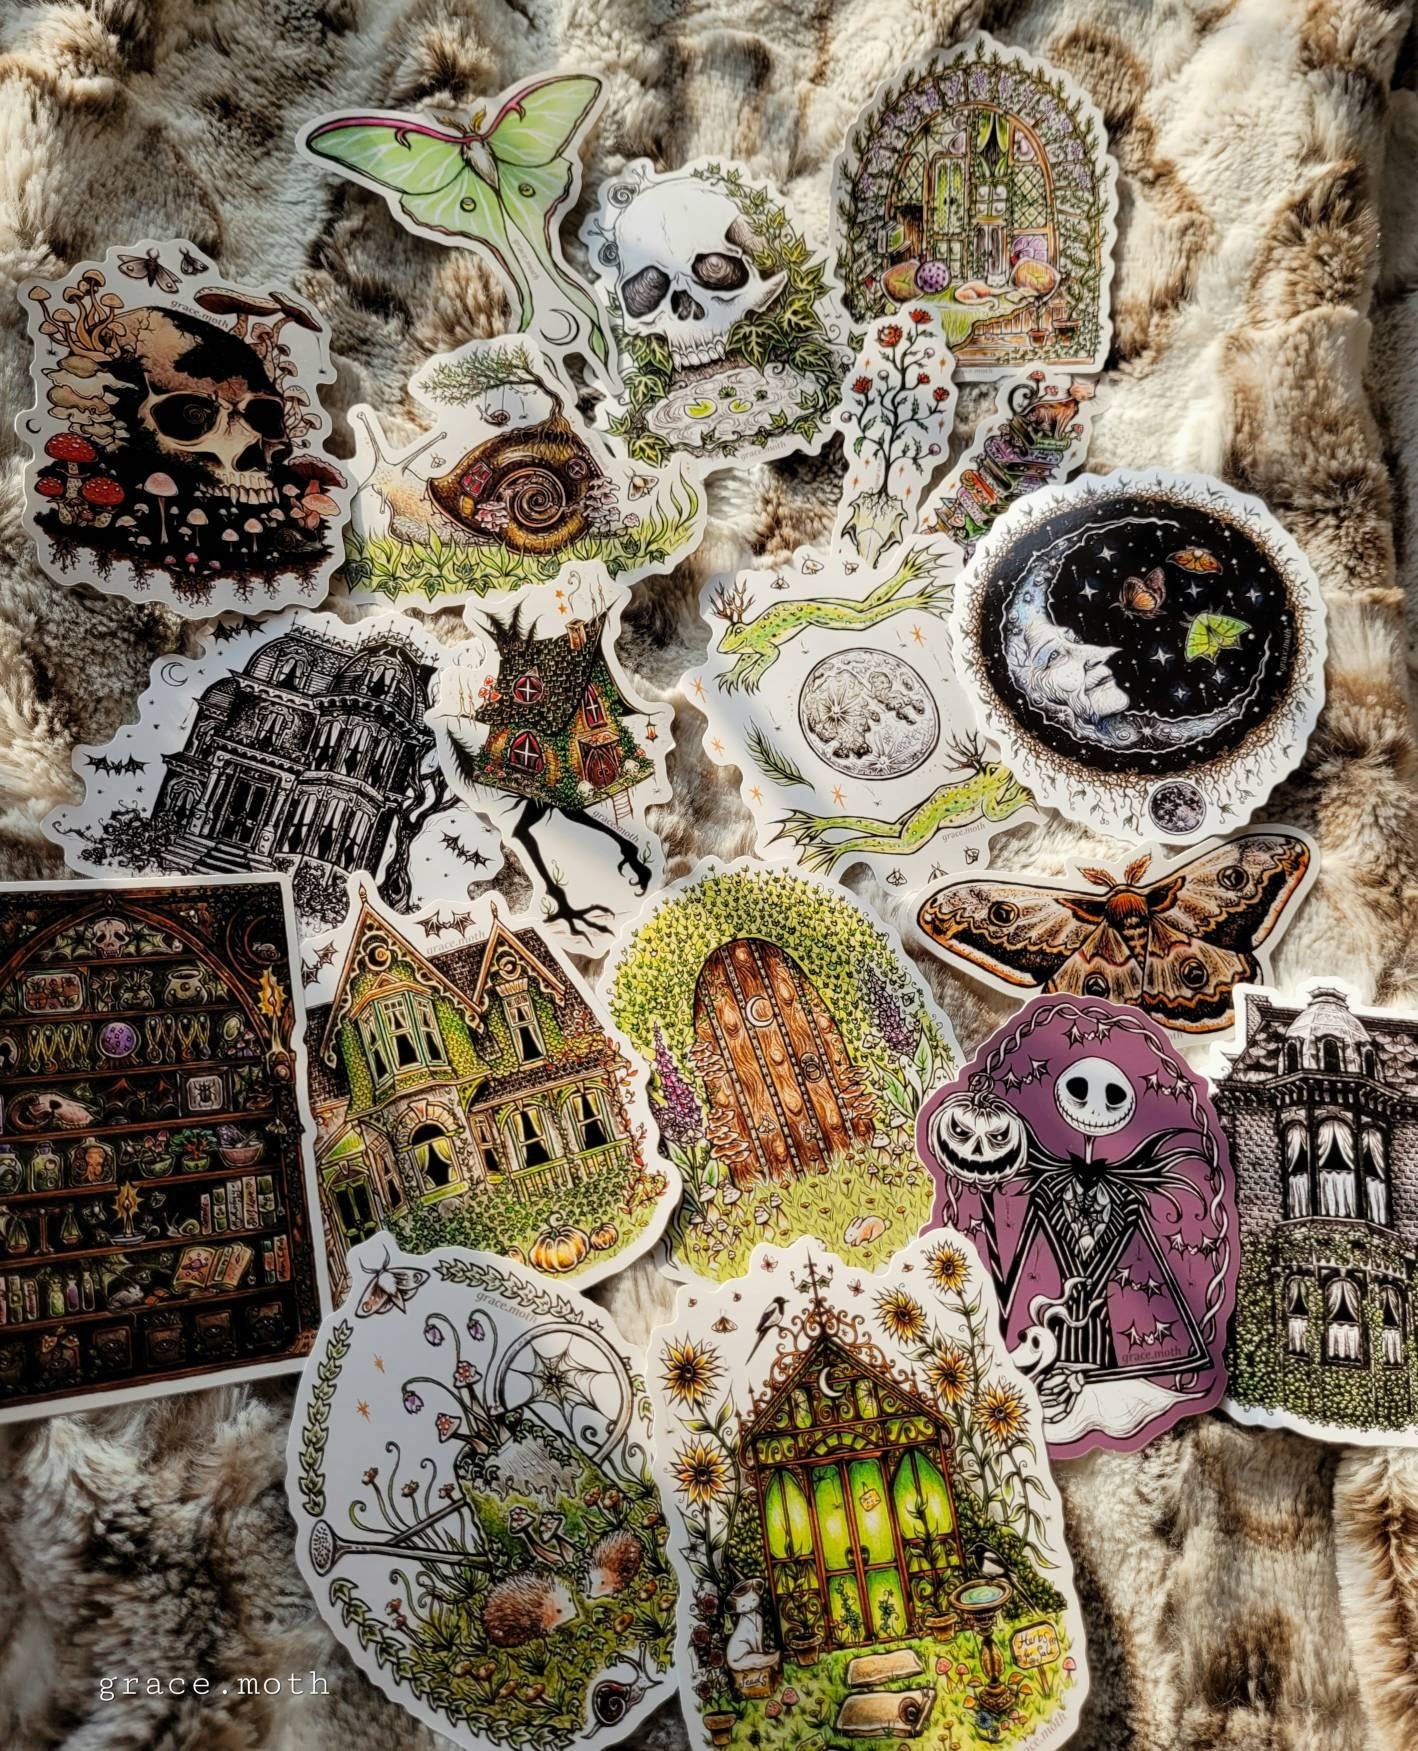 Fall House - Vinyl Sticker 10cm by 8cm - Illustrated by Grace moth. Halloween spooky victorian house sticker